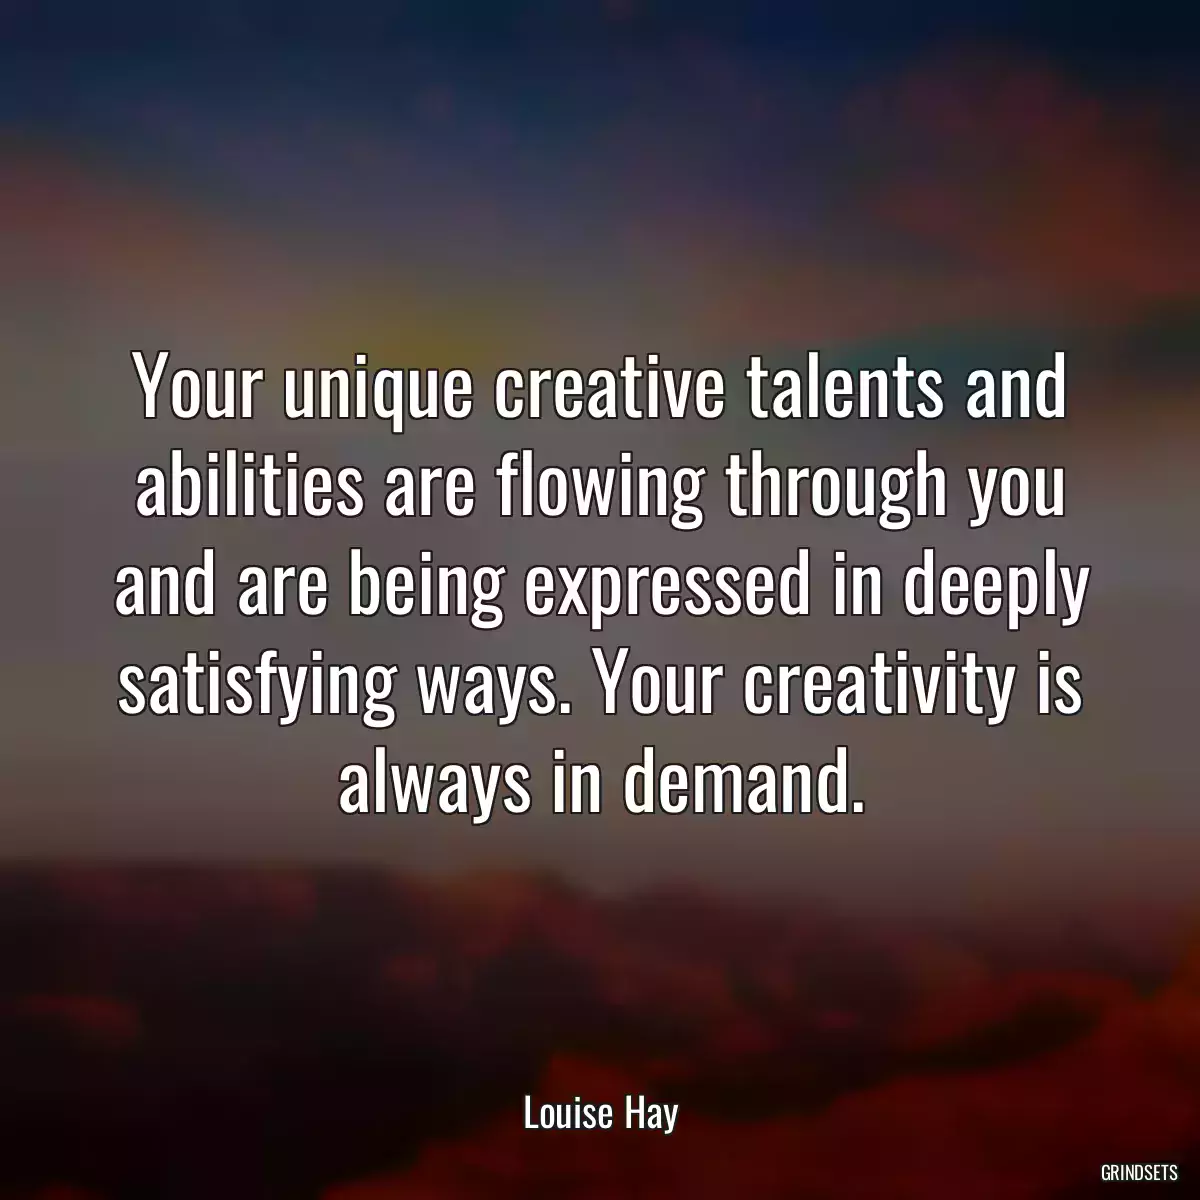 Your unique creative talents and abilities are flowing through you and are being expressed in deeply satisfying ways. Your creativity is always in demand.